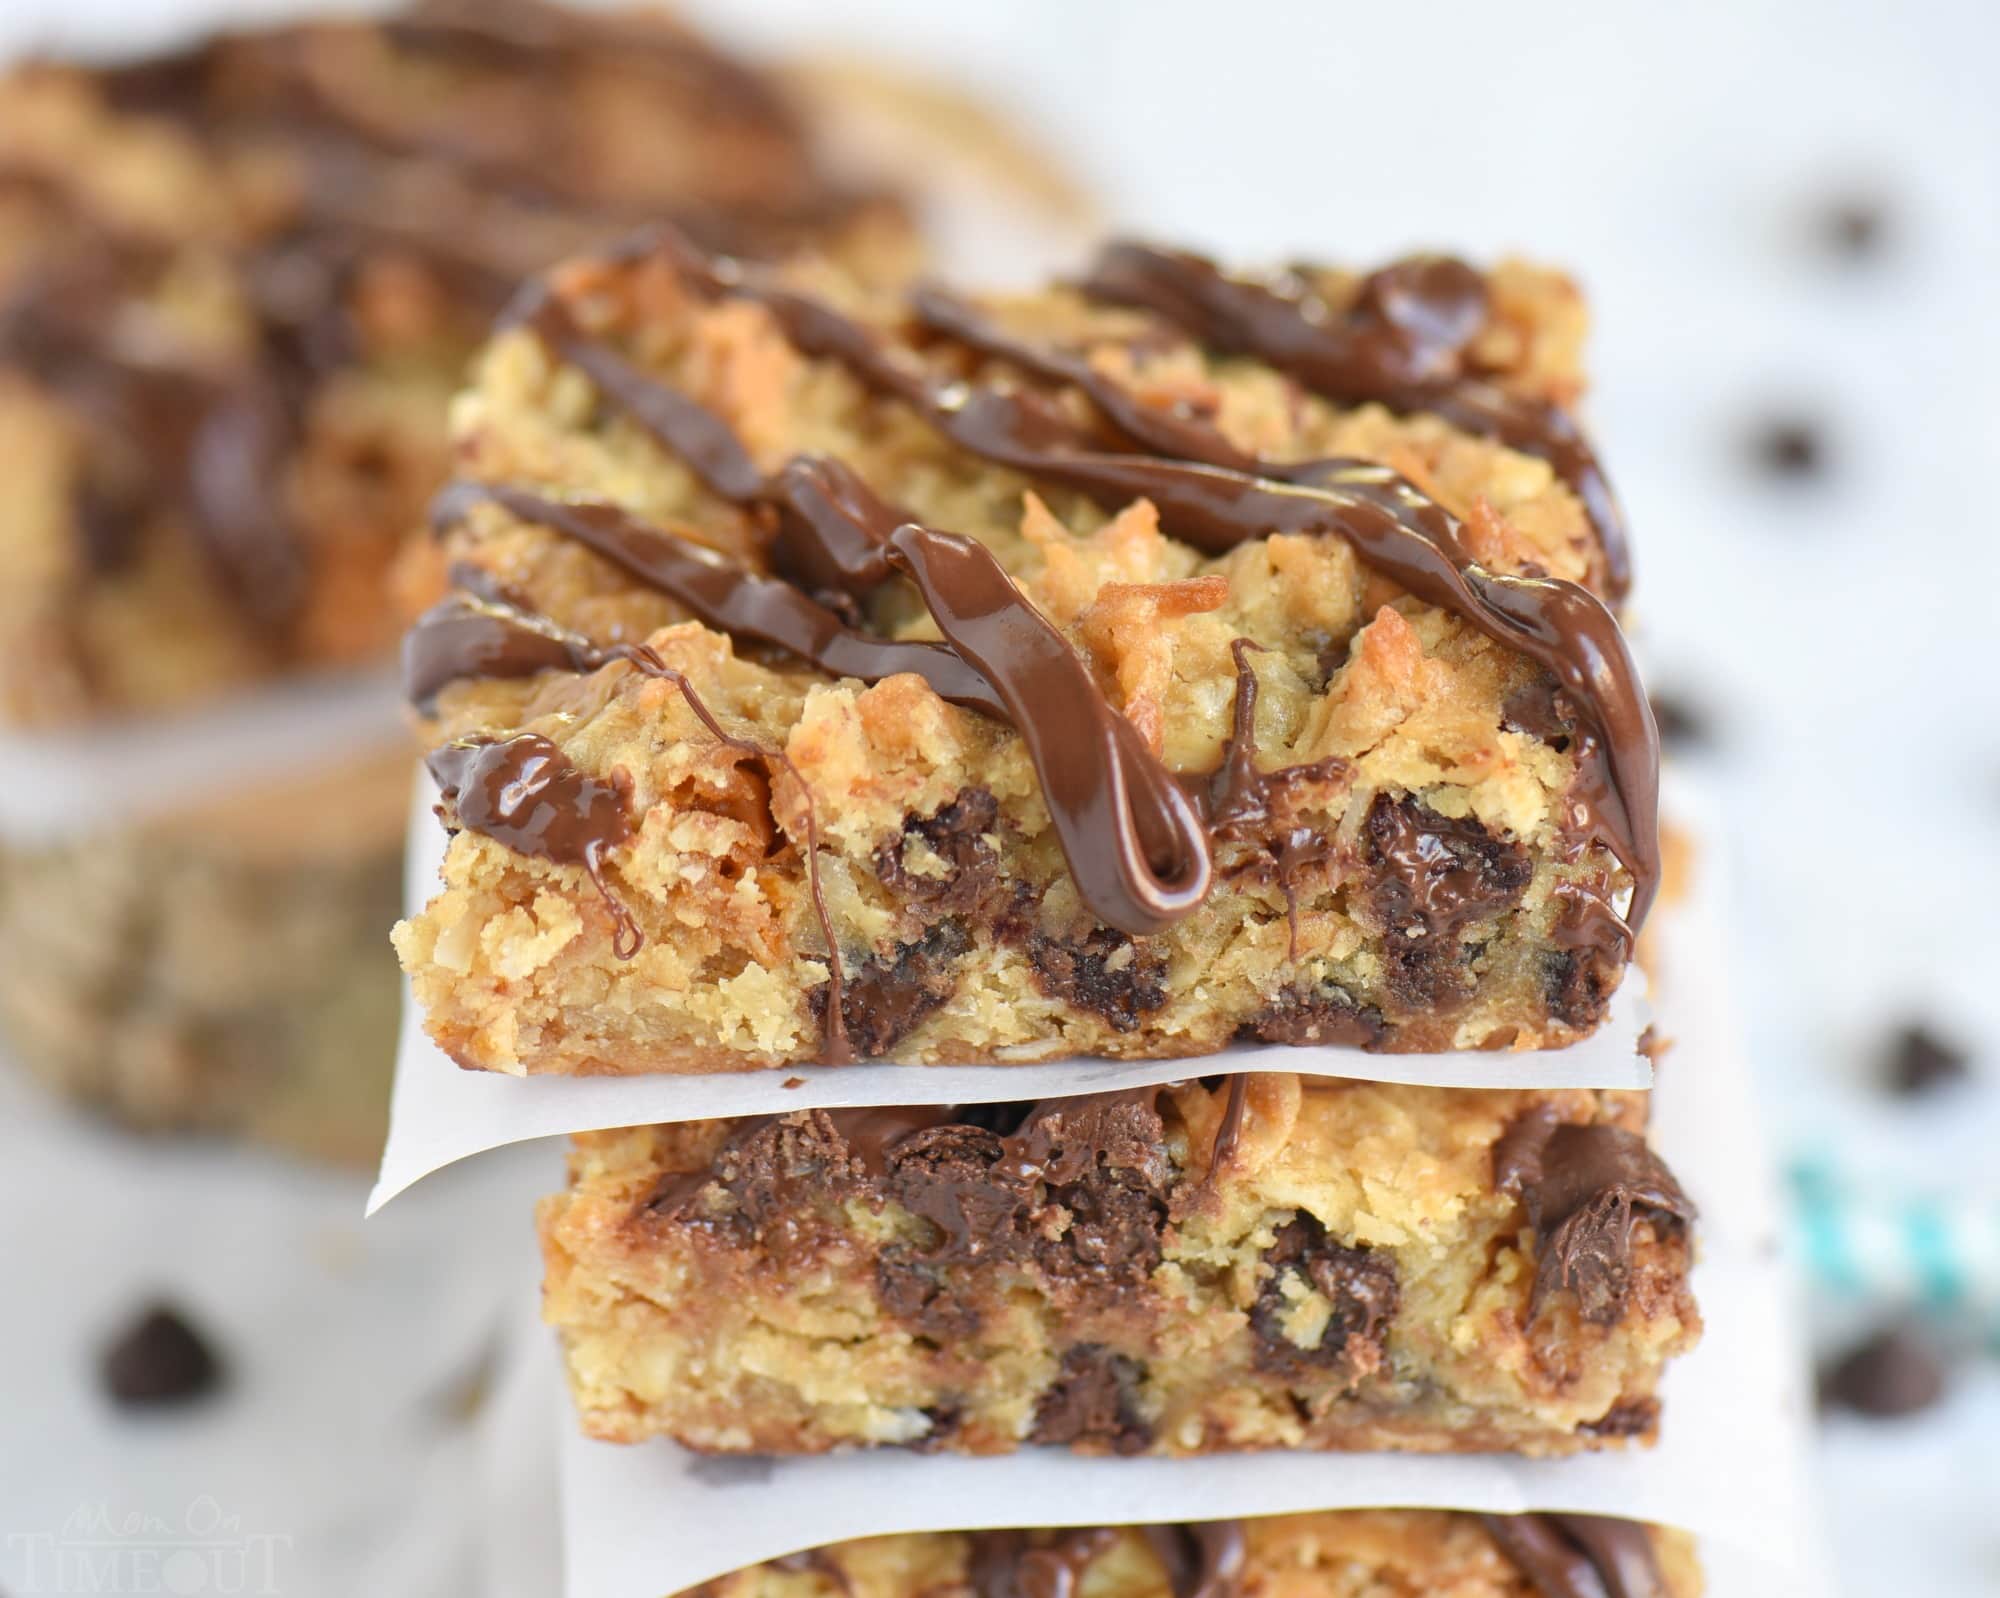 These Coconut Butterscotch Chocolate Chip Gooey Bars are sure to be a hit! So much flavor in one bite! Perfect for potlucks, picnics, road trips and more! // Mom On Timeout